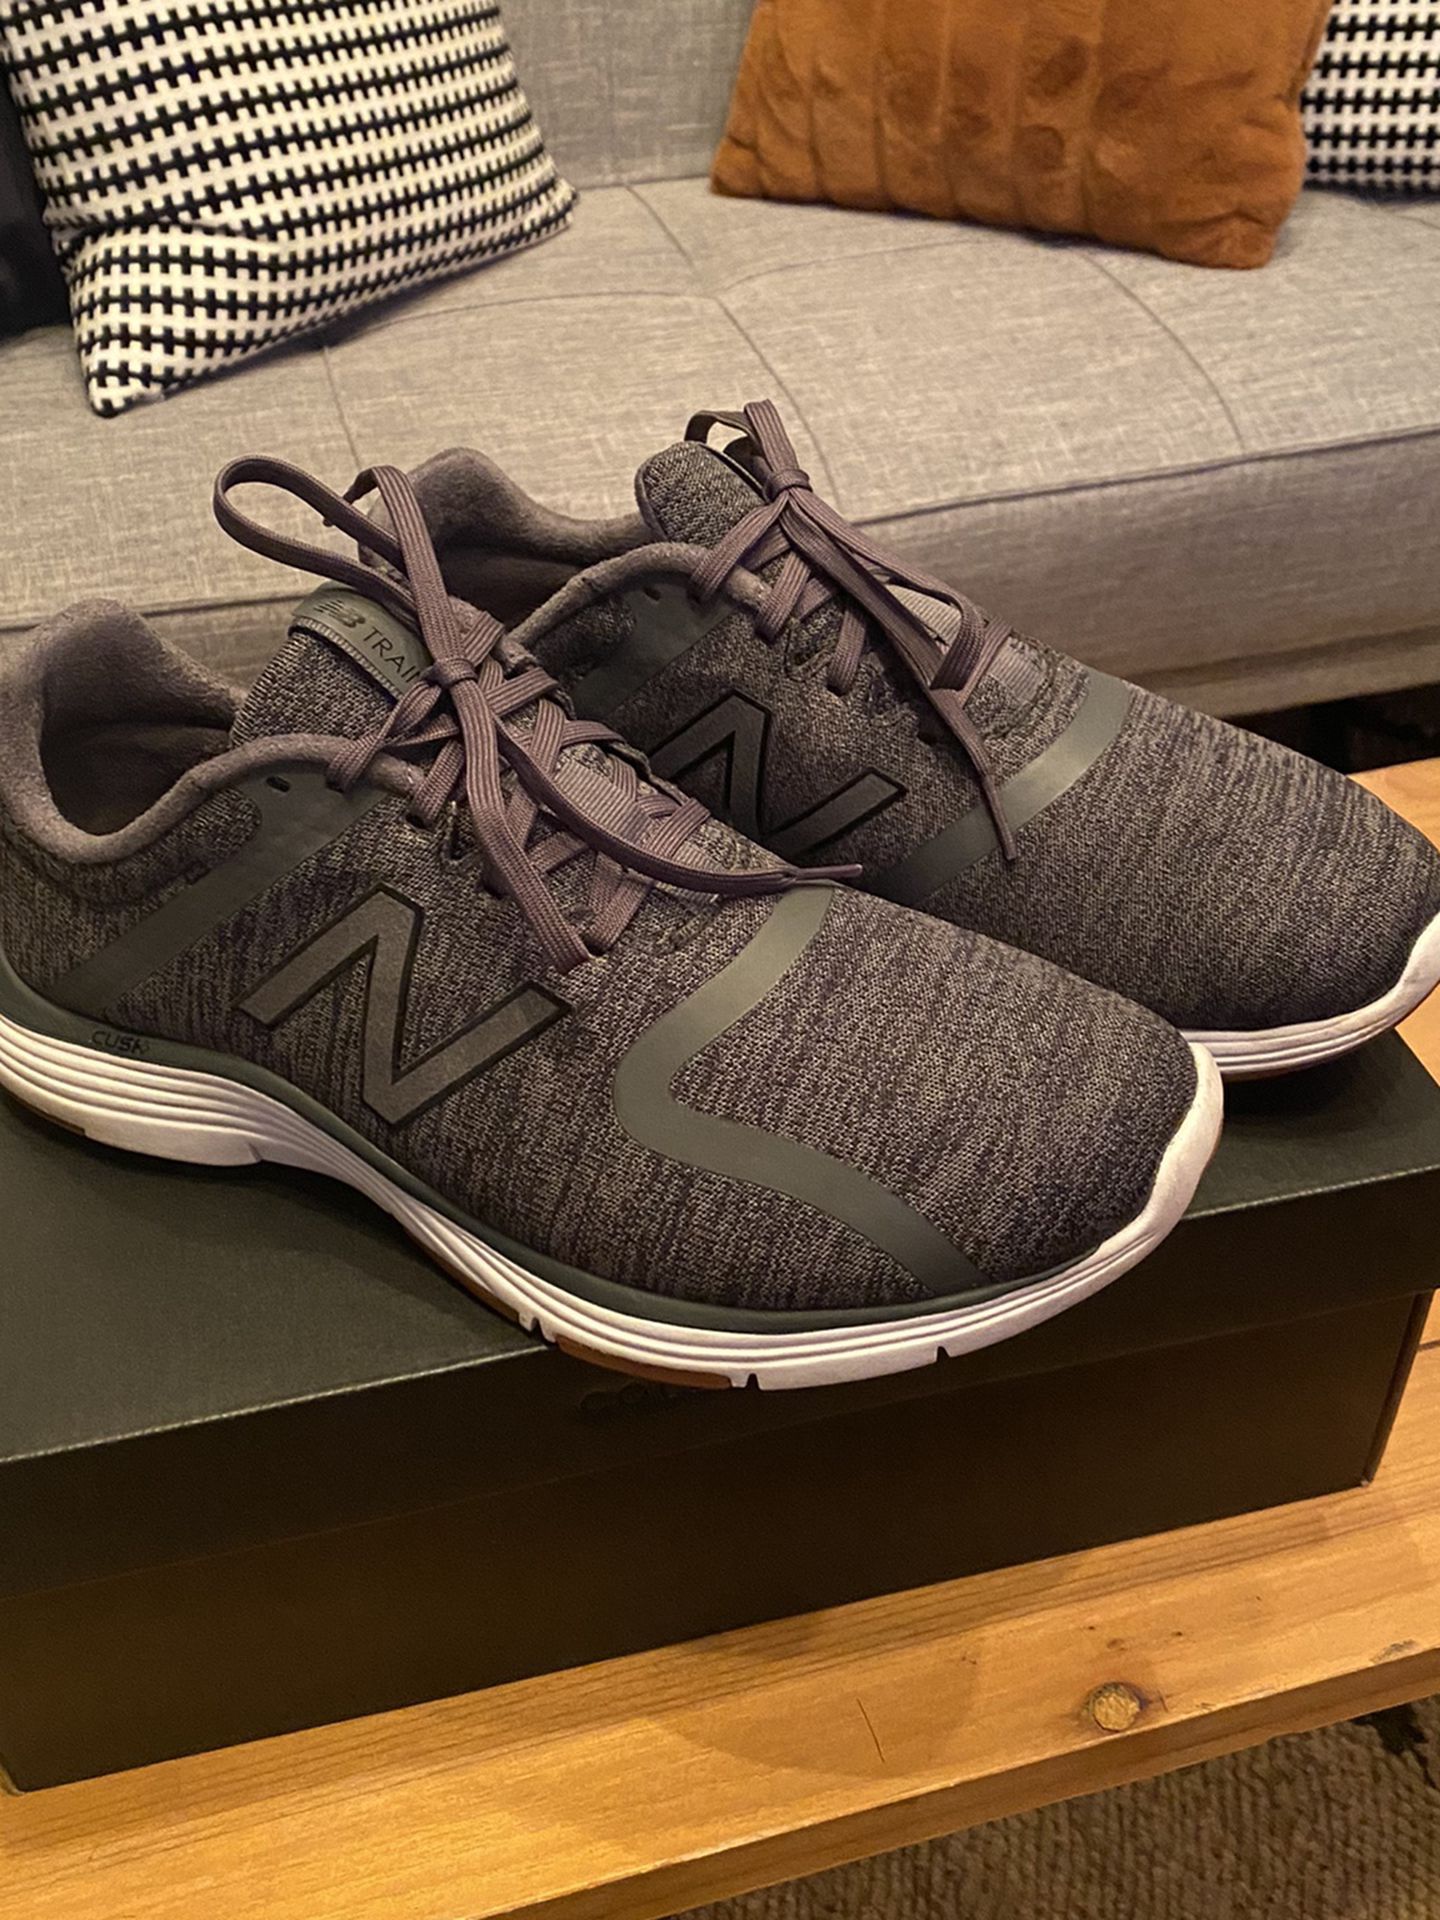 Men’s New Balance Trainers (11M) - Gently Used